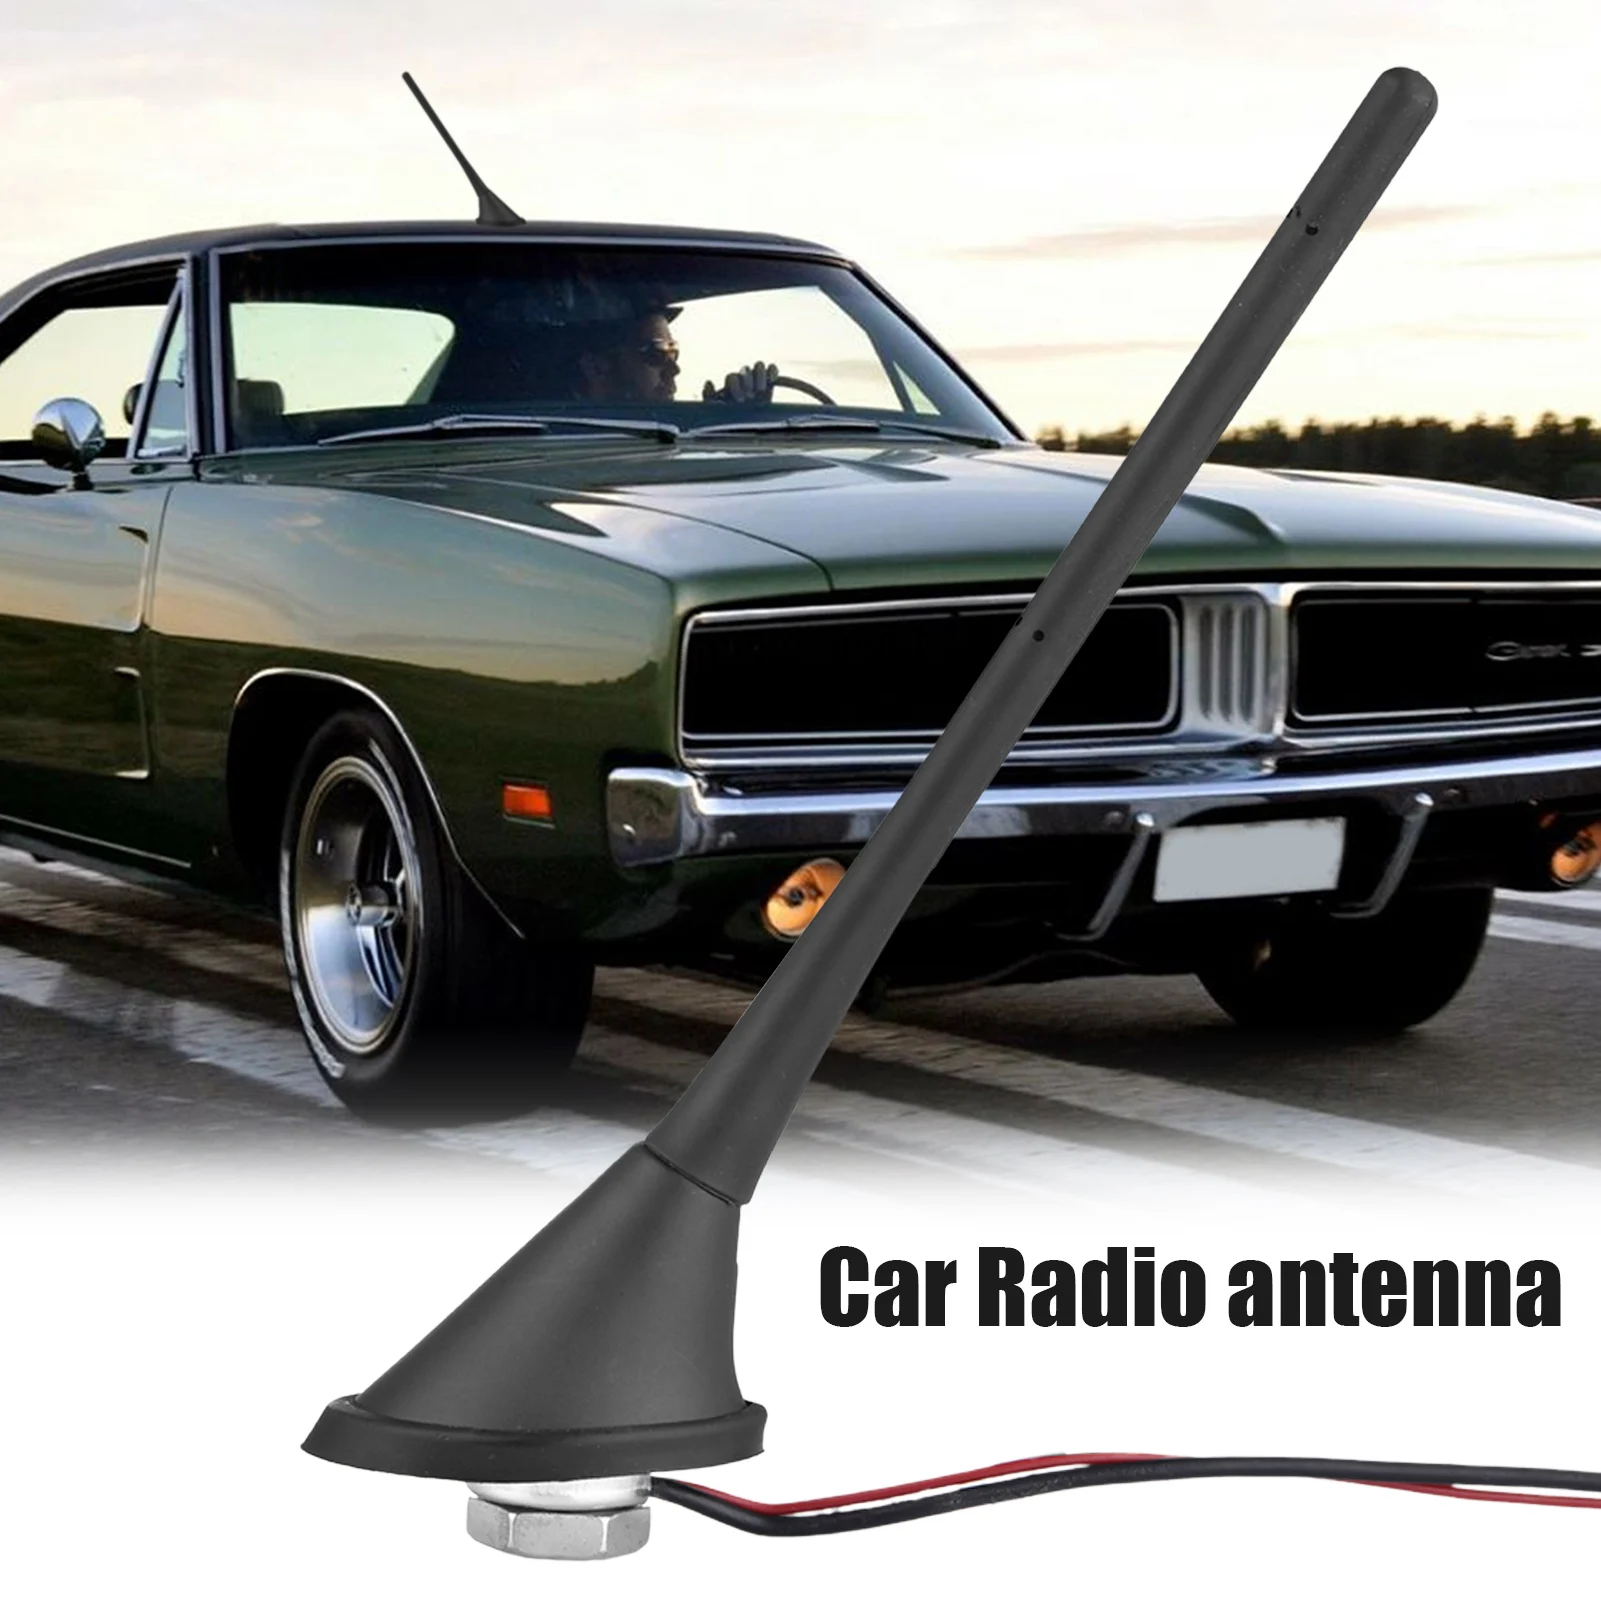 

Car Radio Antenna Car Antenna Radio Antenna Universal Car Antenna Replacement Boost FM & AM Signals For Cars Truck RVs & SUVs